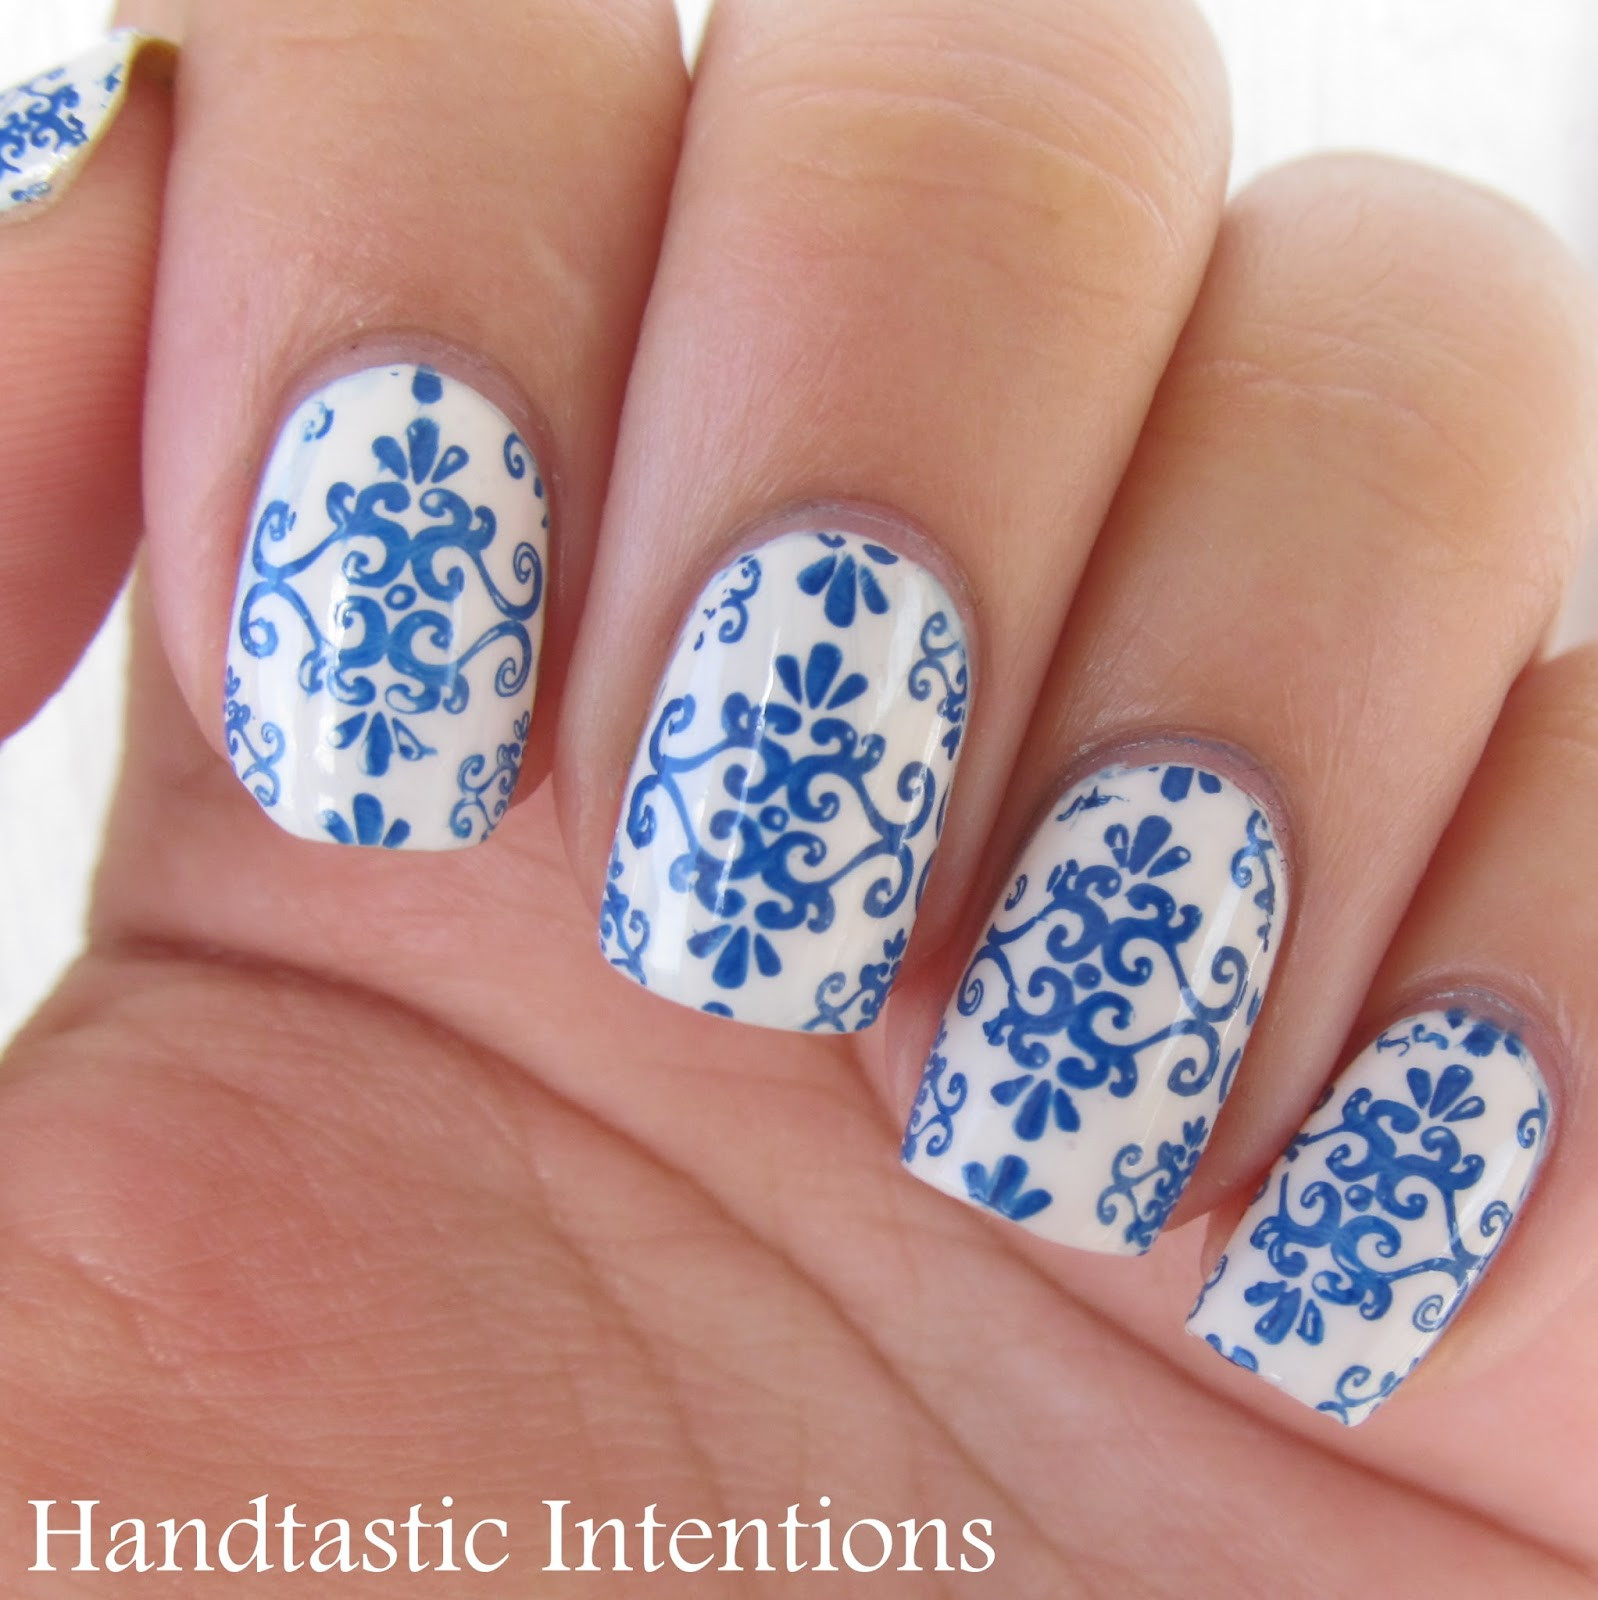 Blue And White Nail Designs
 Handtastic Intentions Nail Art Blue and White Ceramics